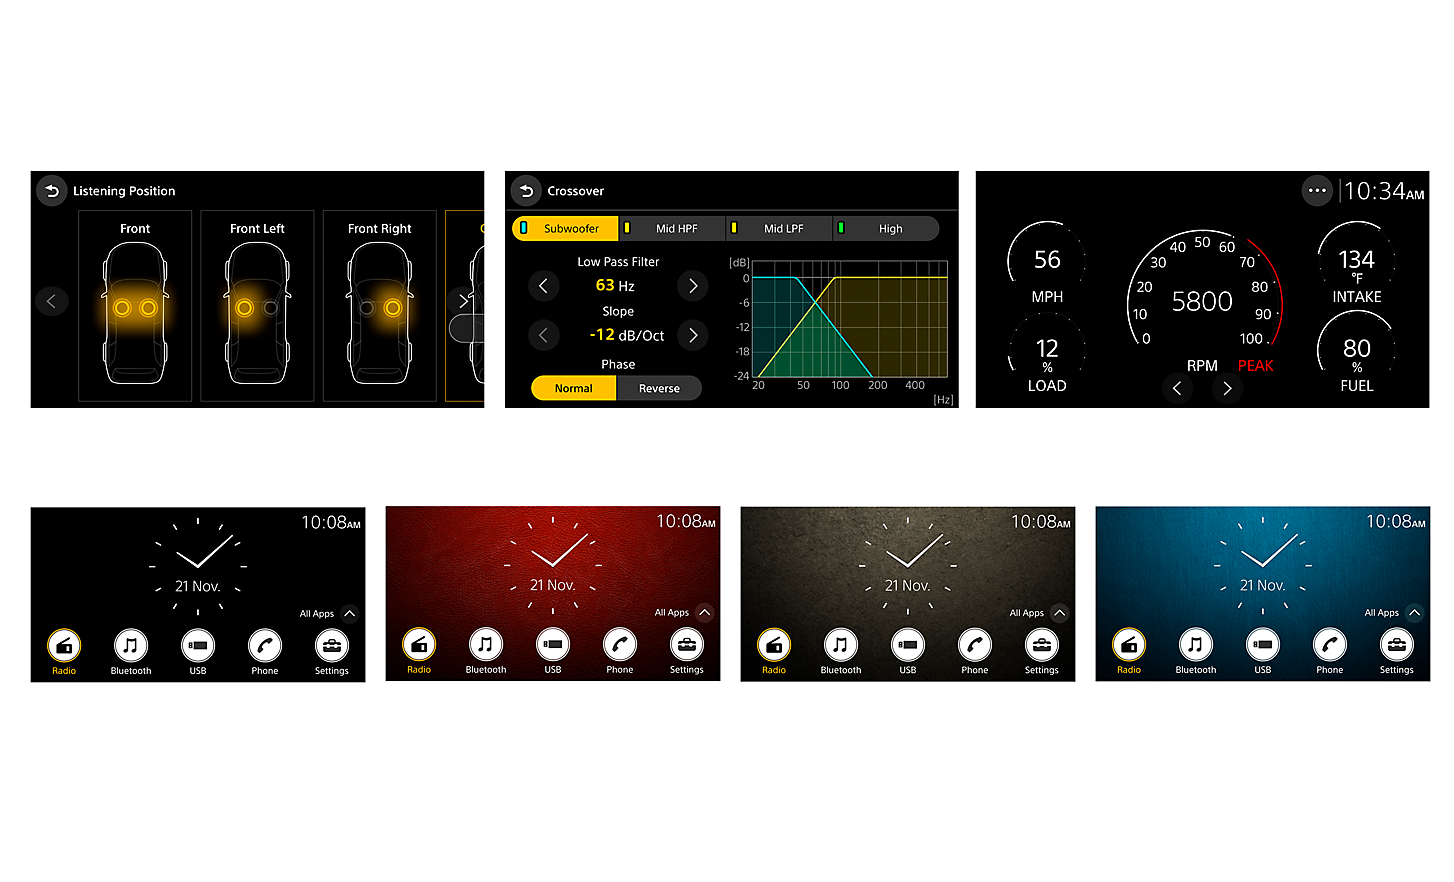 Multiple user interfaces displaying sound controls, engine diagnostics and clock faces with coloured backgrounds.